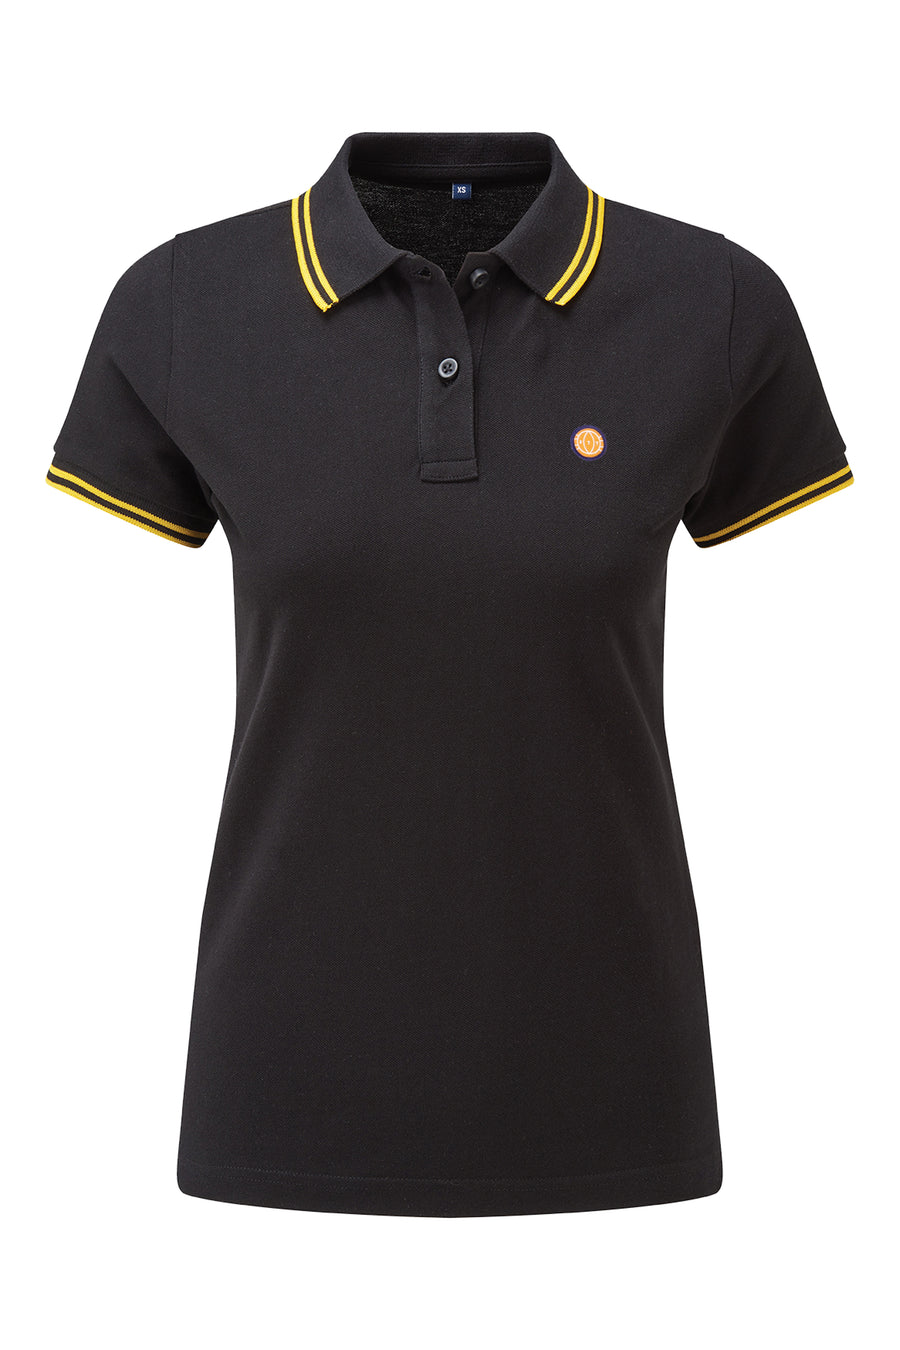 Women's Black and Yellow Tipped FTT Polo